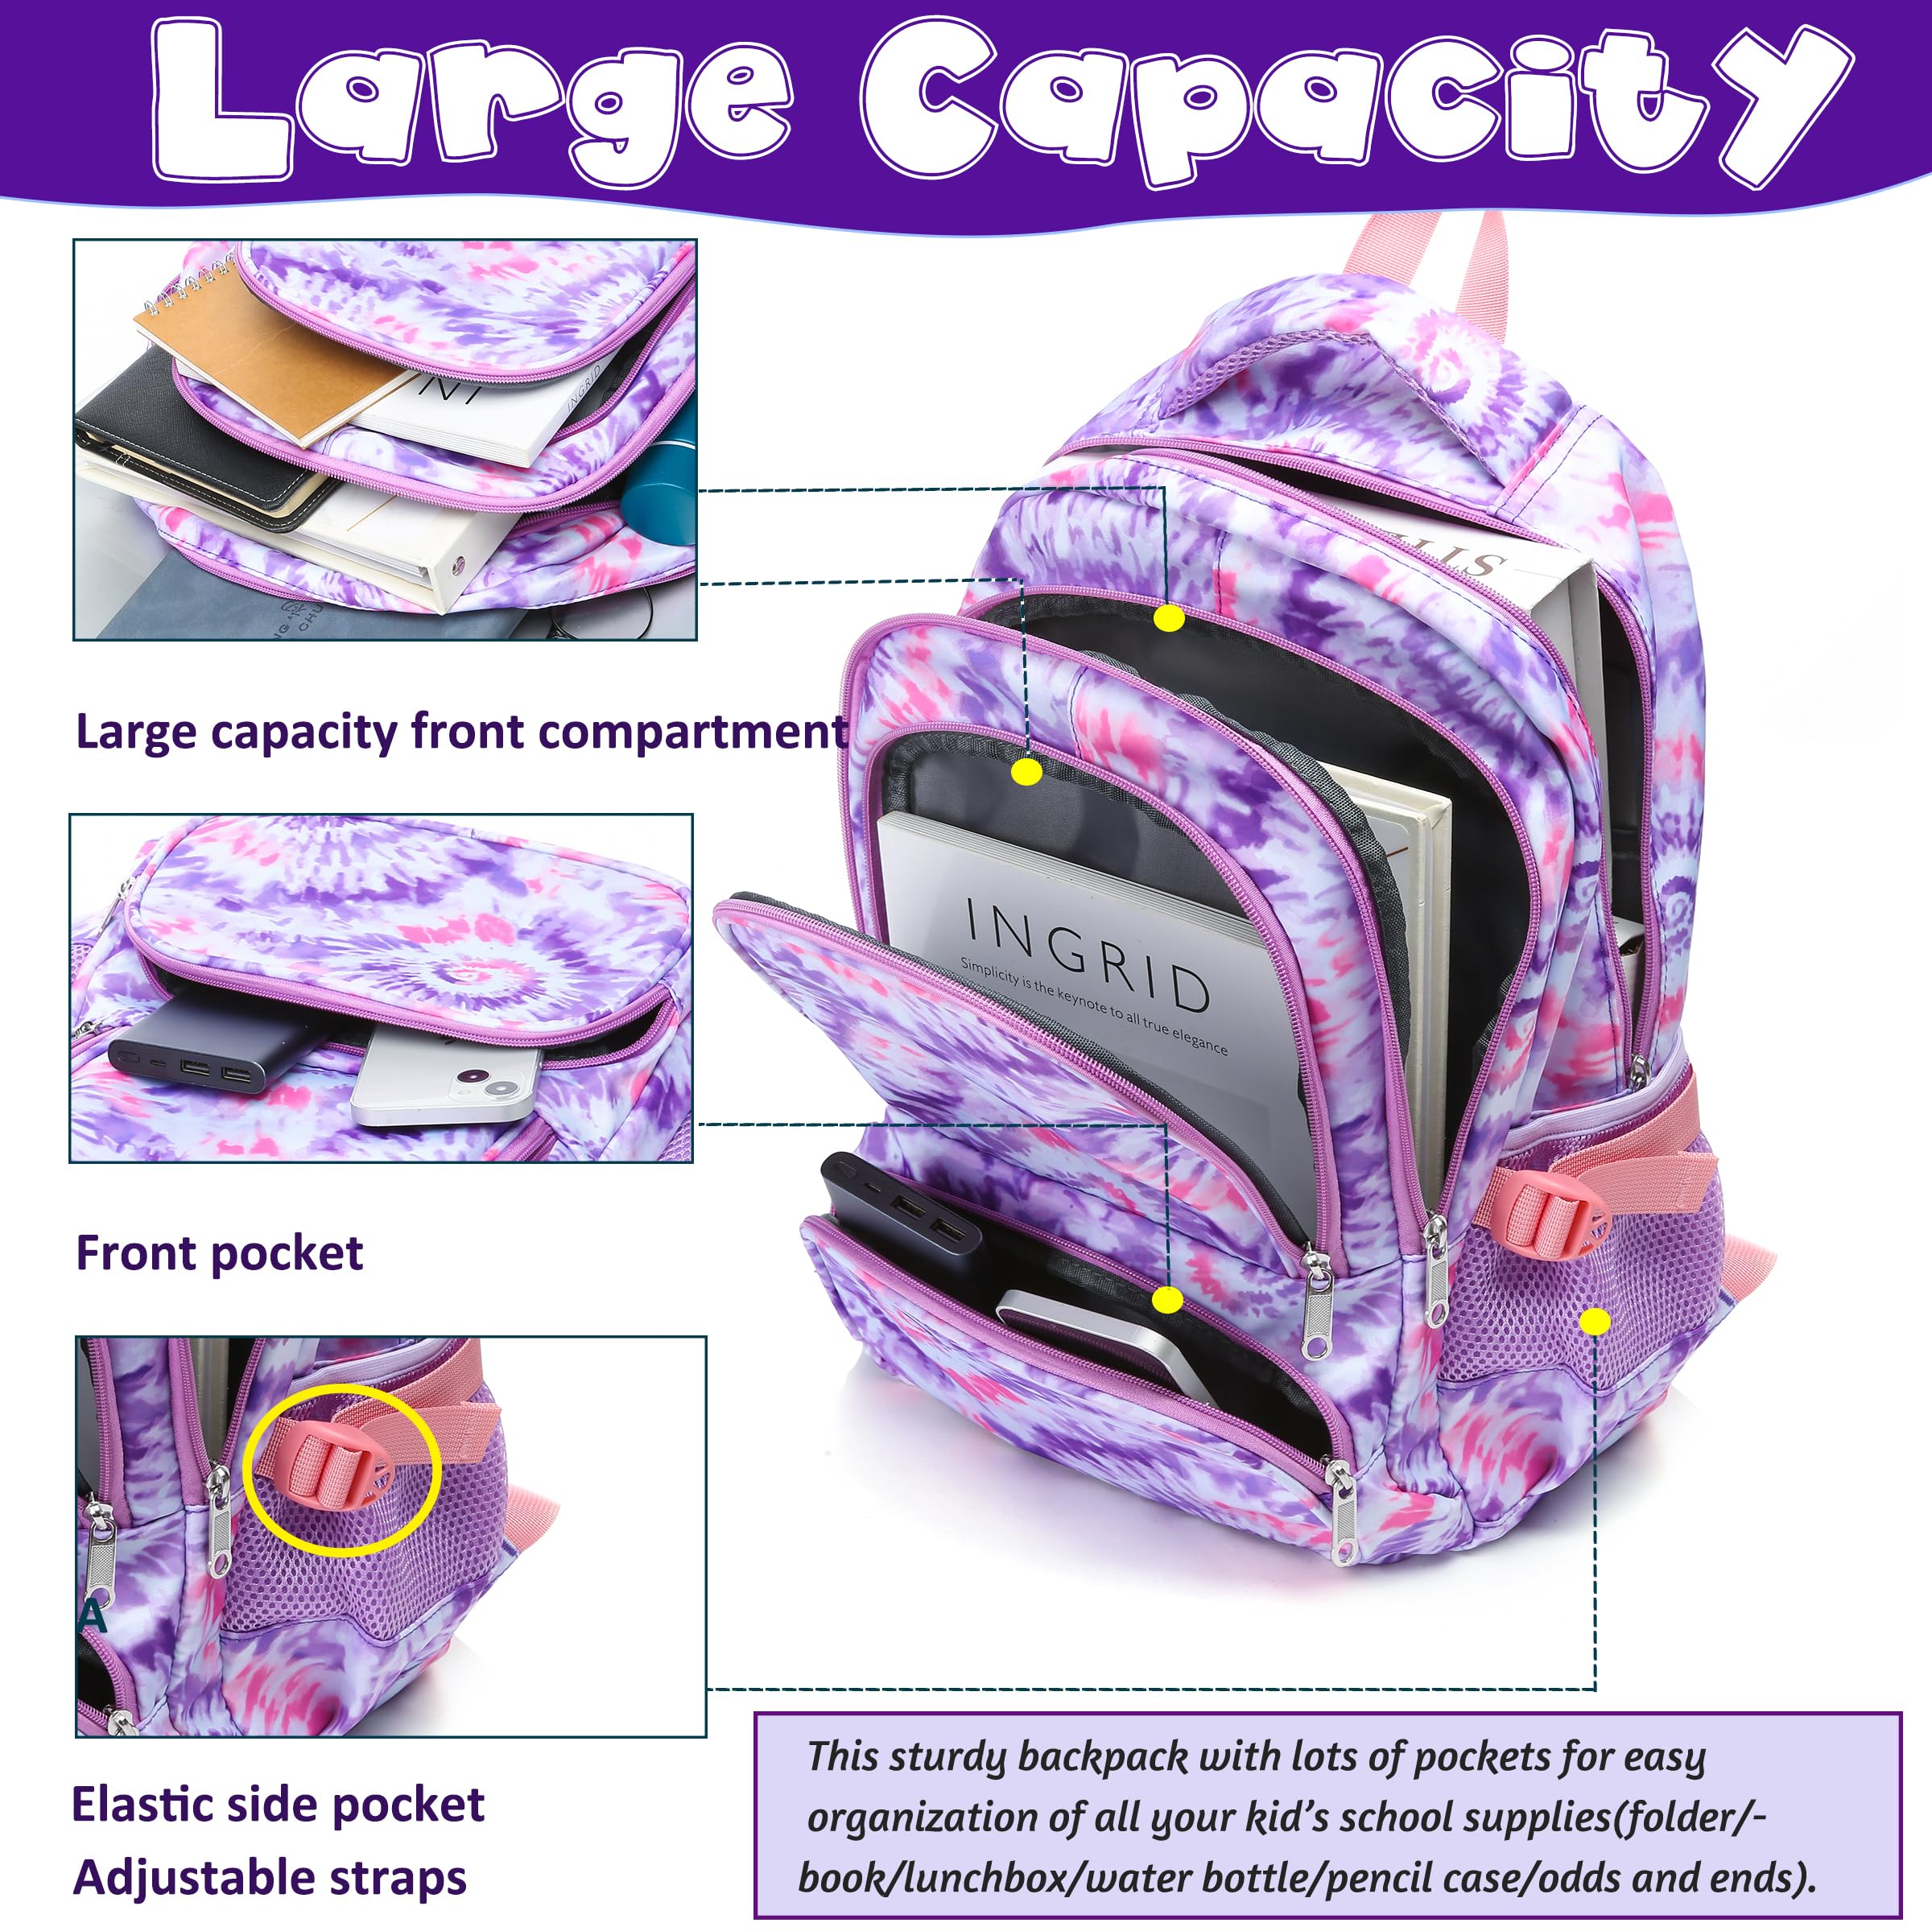 BLUEFAIRY Kids Backpack for Girls Elementary Primary Middle School Bags for Teens Childs Tie Dye Bookbags Cute Durable Travel Gifts Morrales Mochilas para Niñas de 4 5 6 7 8 9 Nños 17 Inch (Purple)